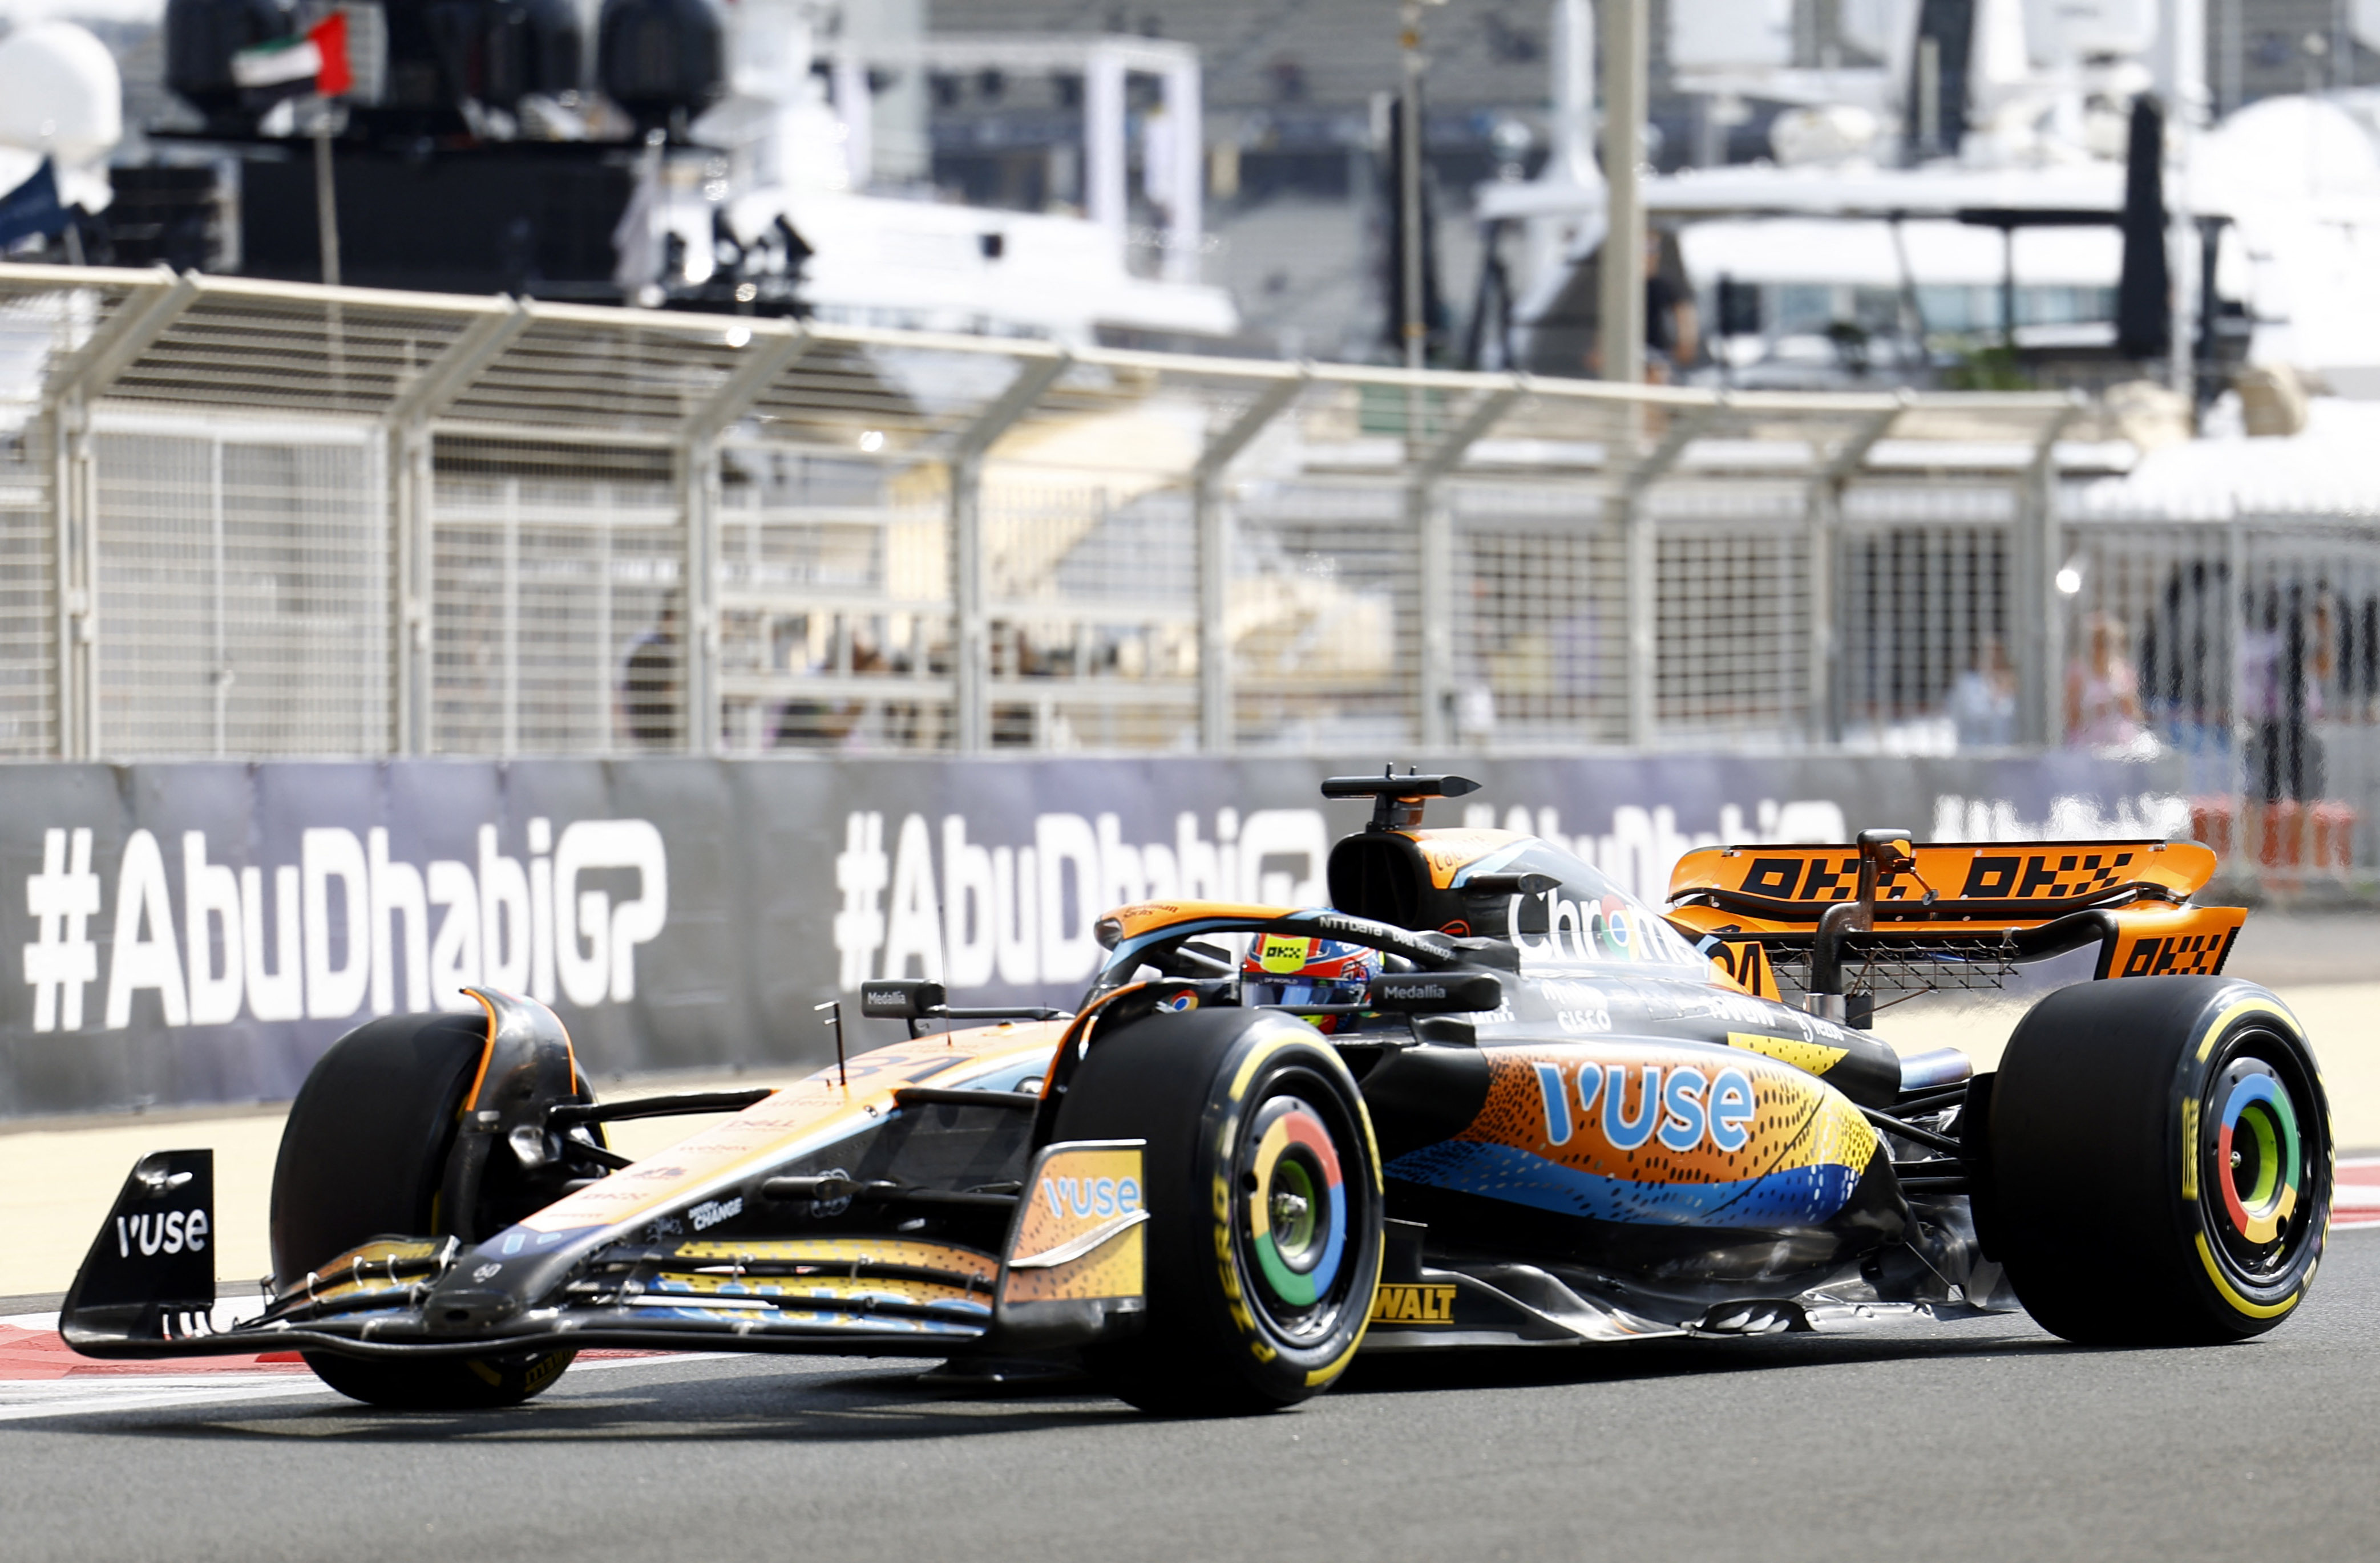 Formula 1 on course to deliver 100% sustainable fuels for 2026